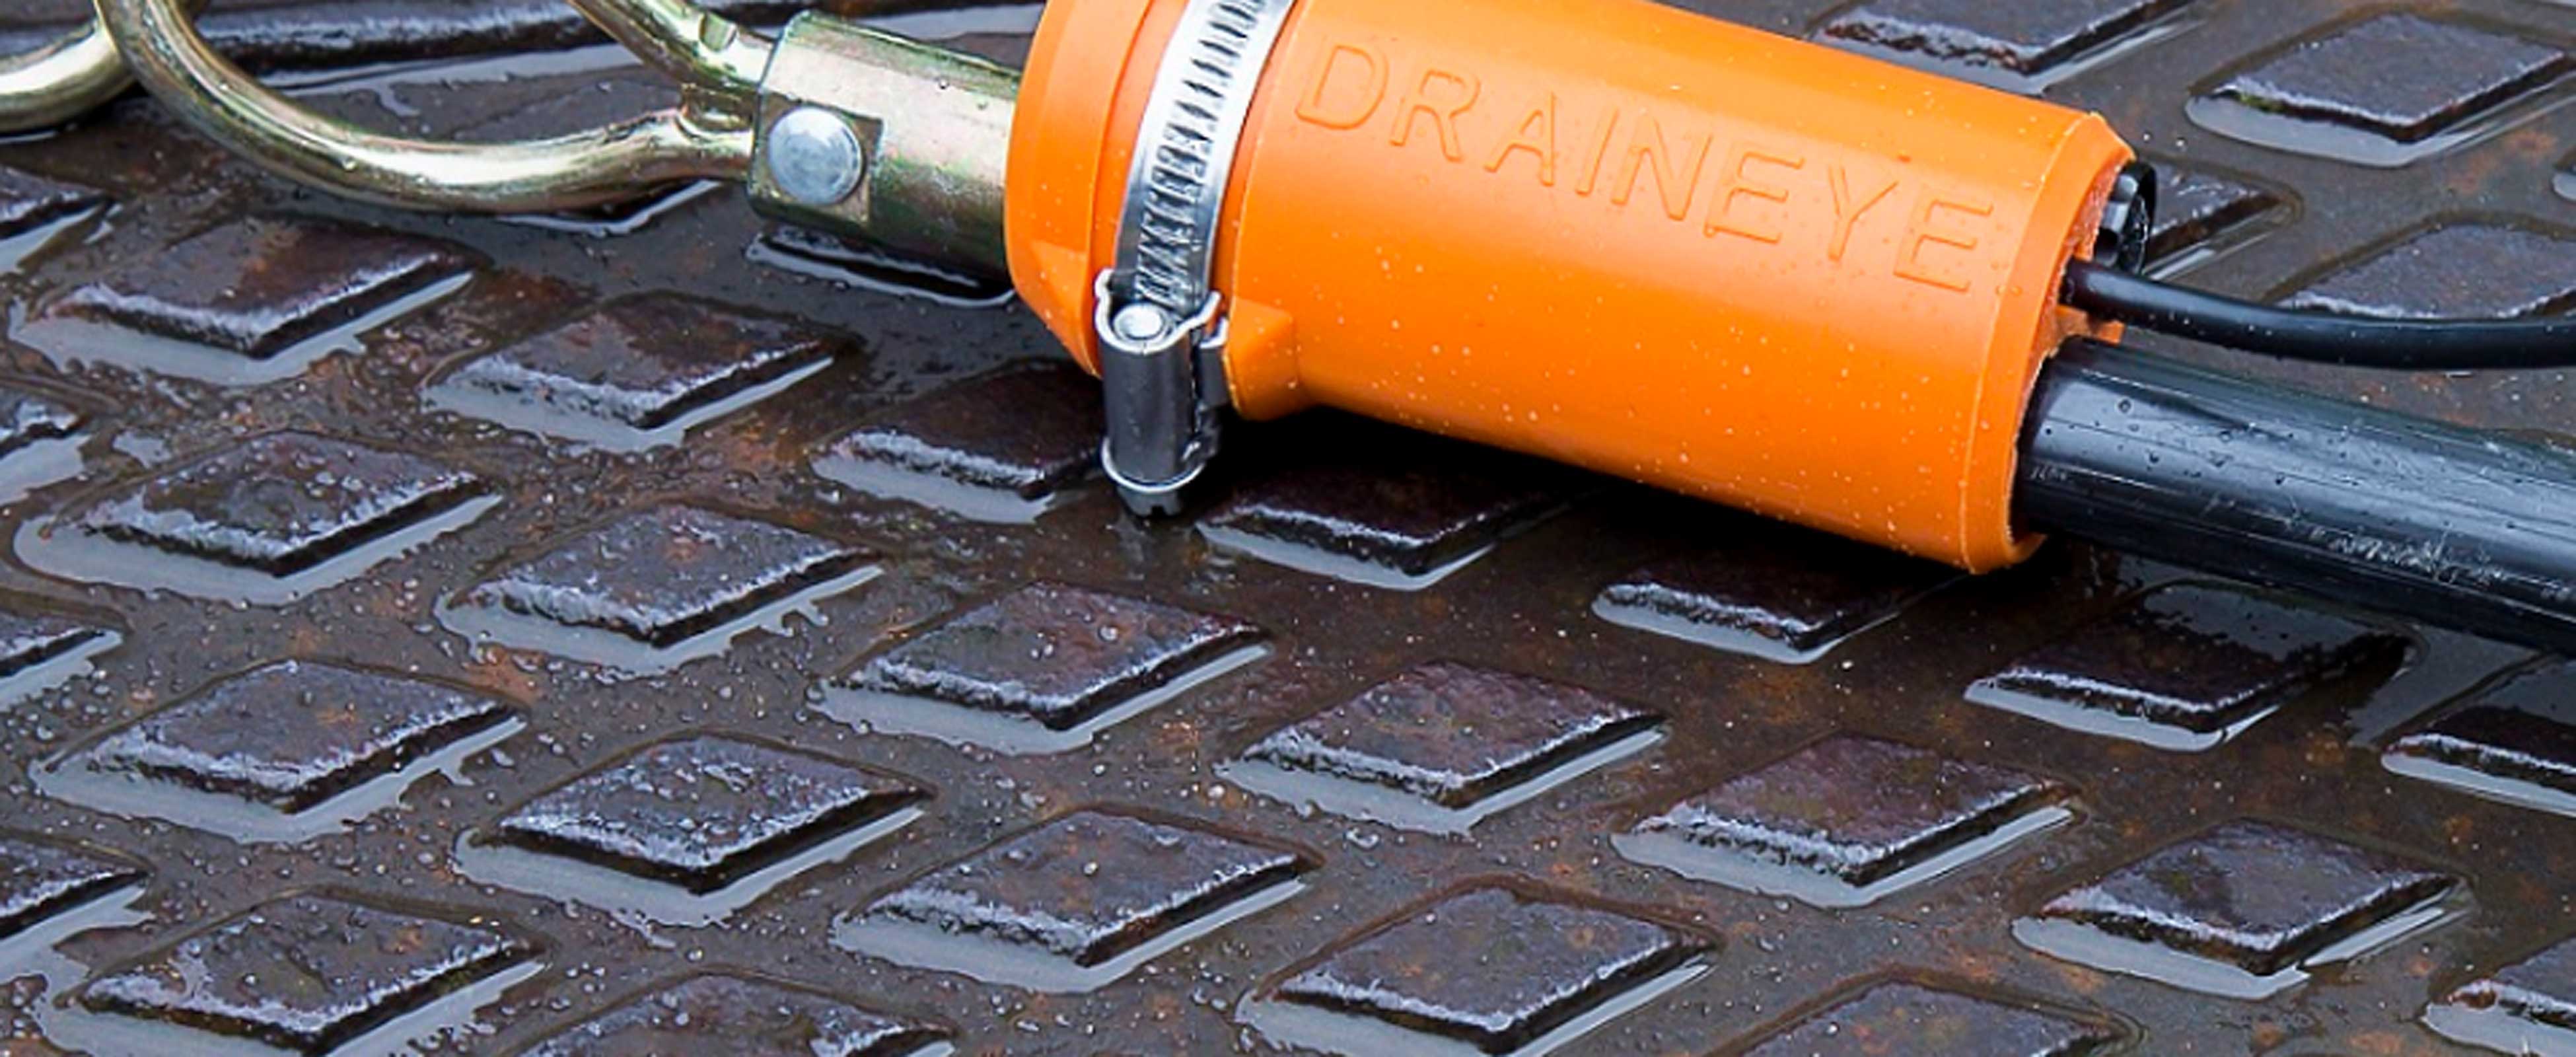 Draineye device designed for drain inspection by Gm Design Development